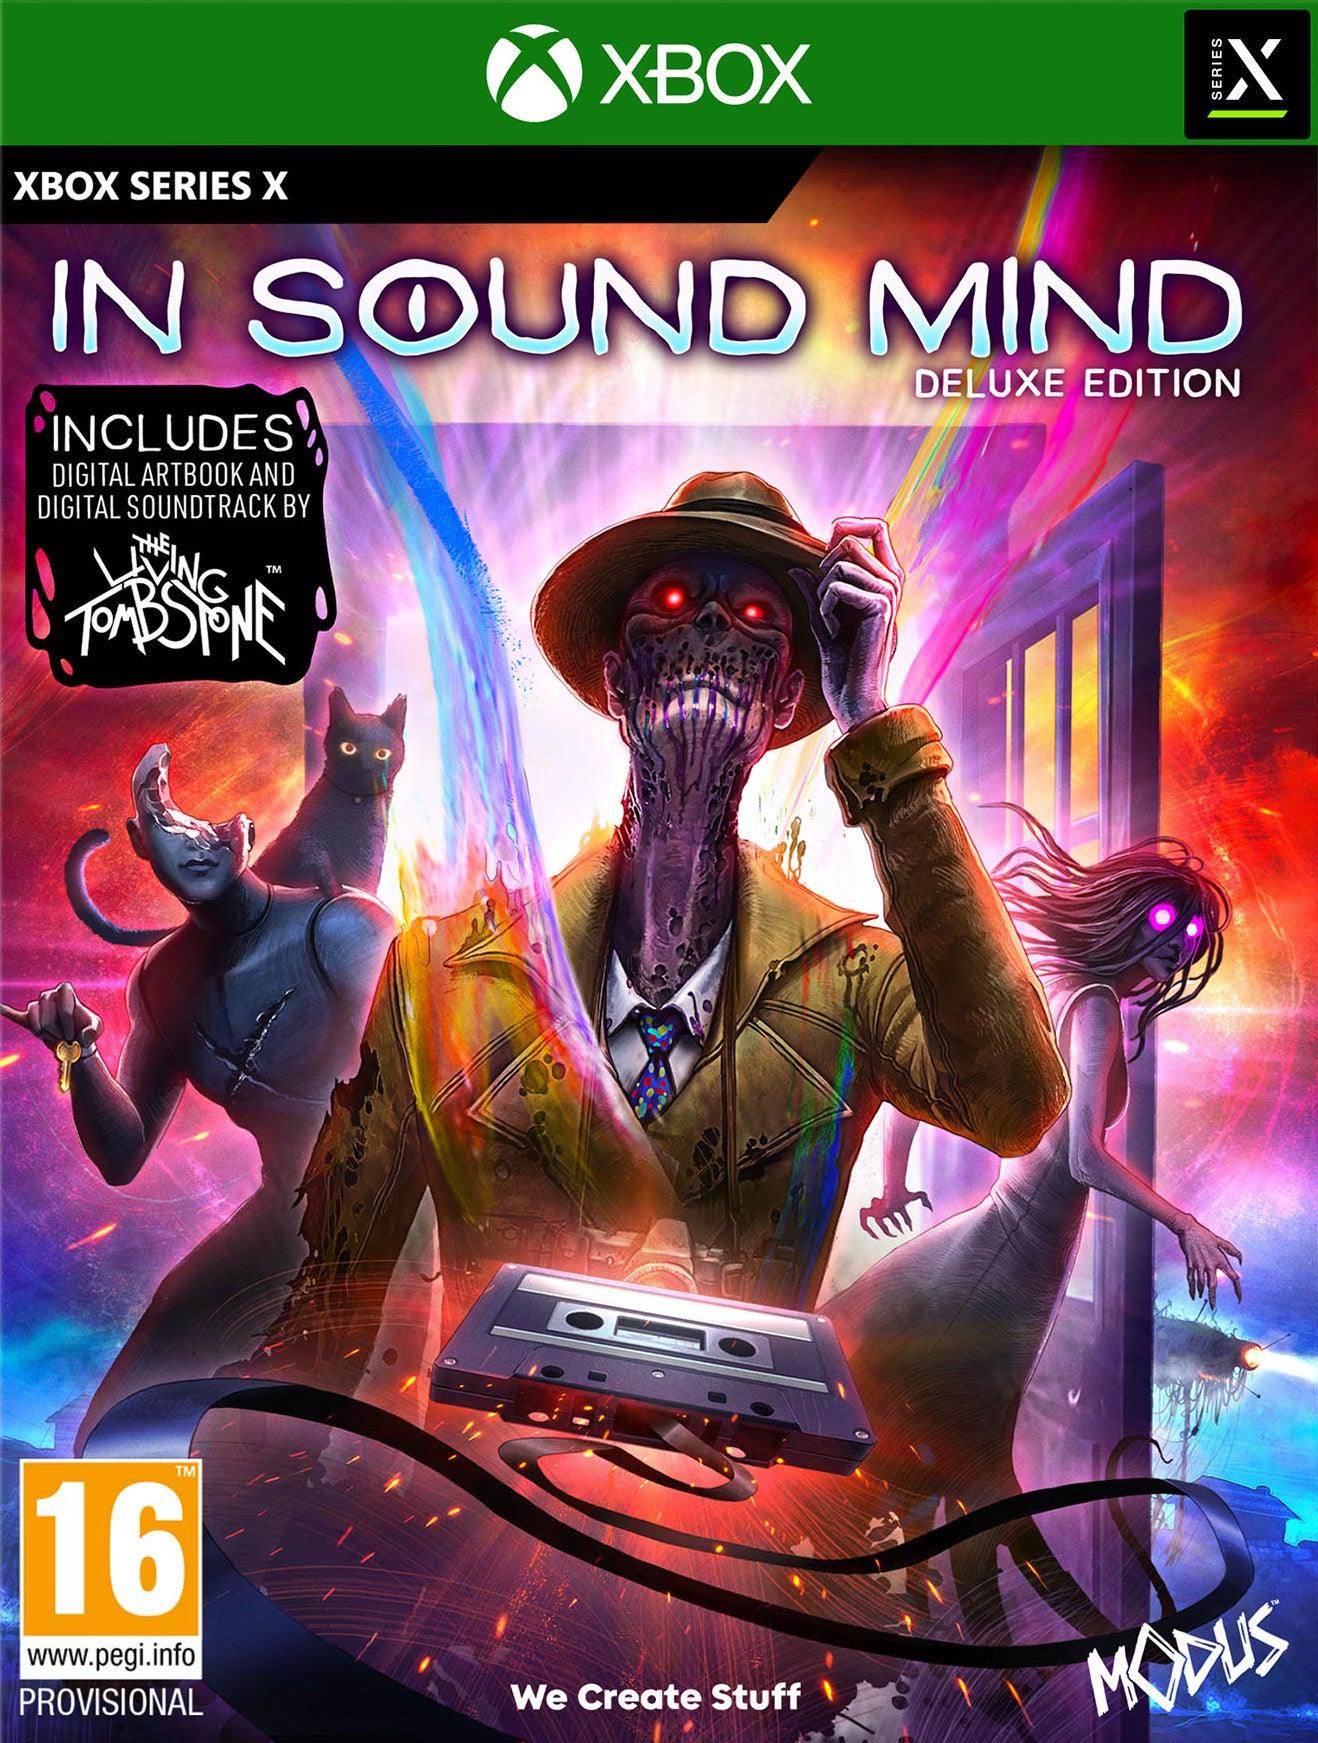 In Sound Mind Deluxe Edition - Want a New Gadget